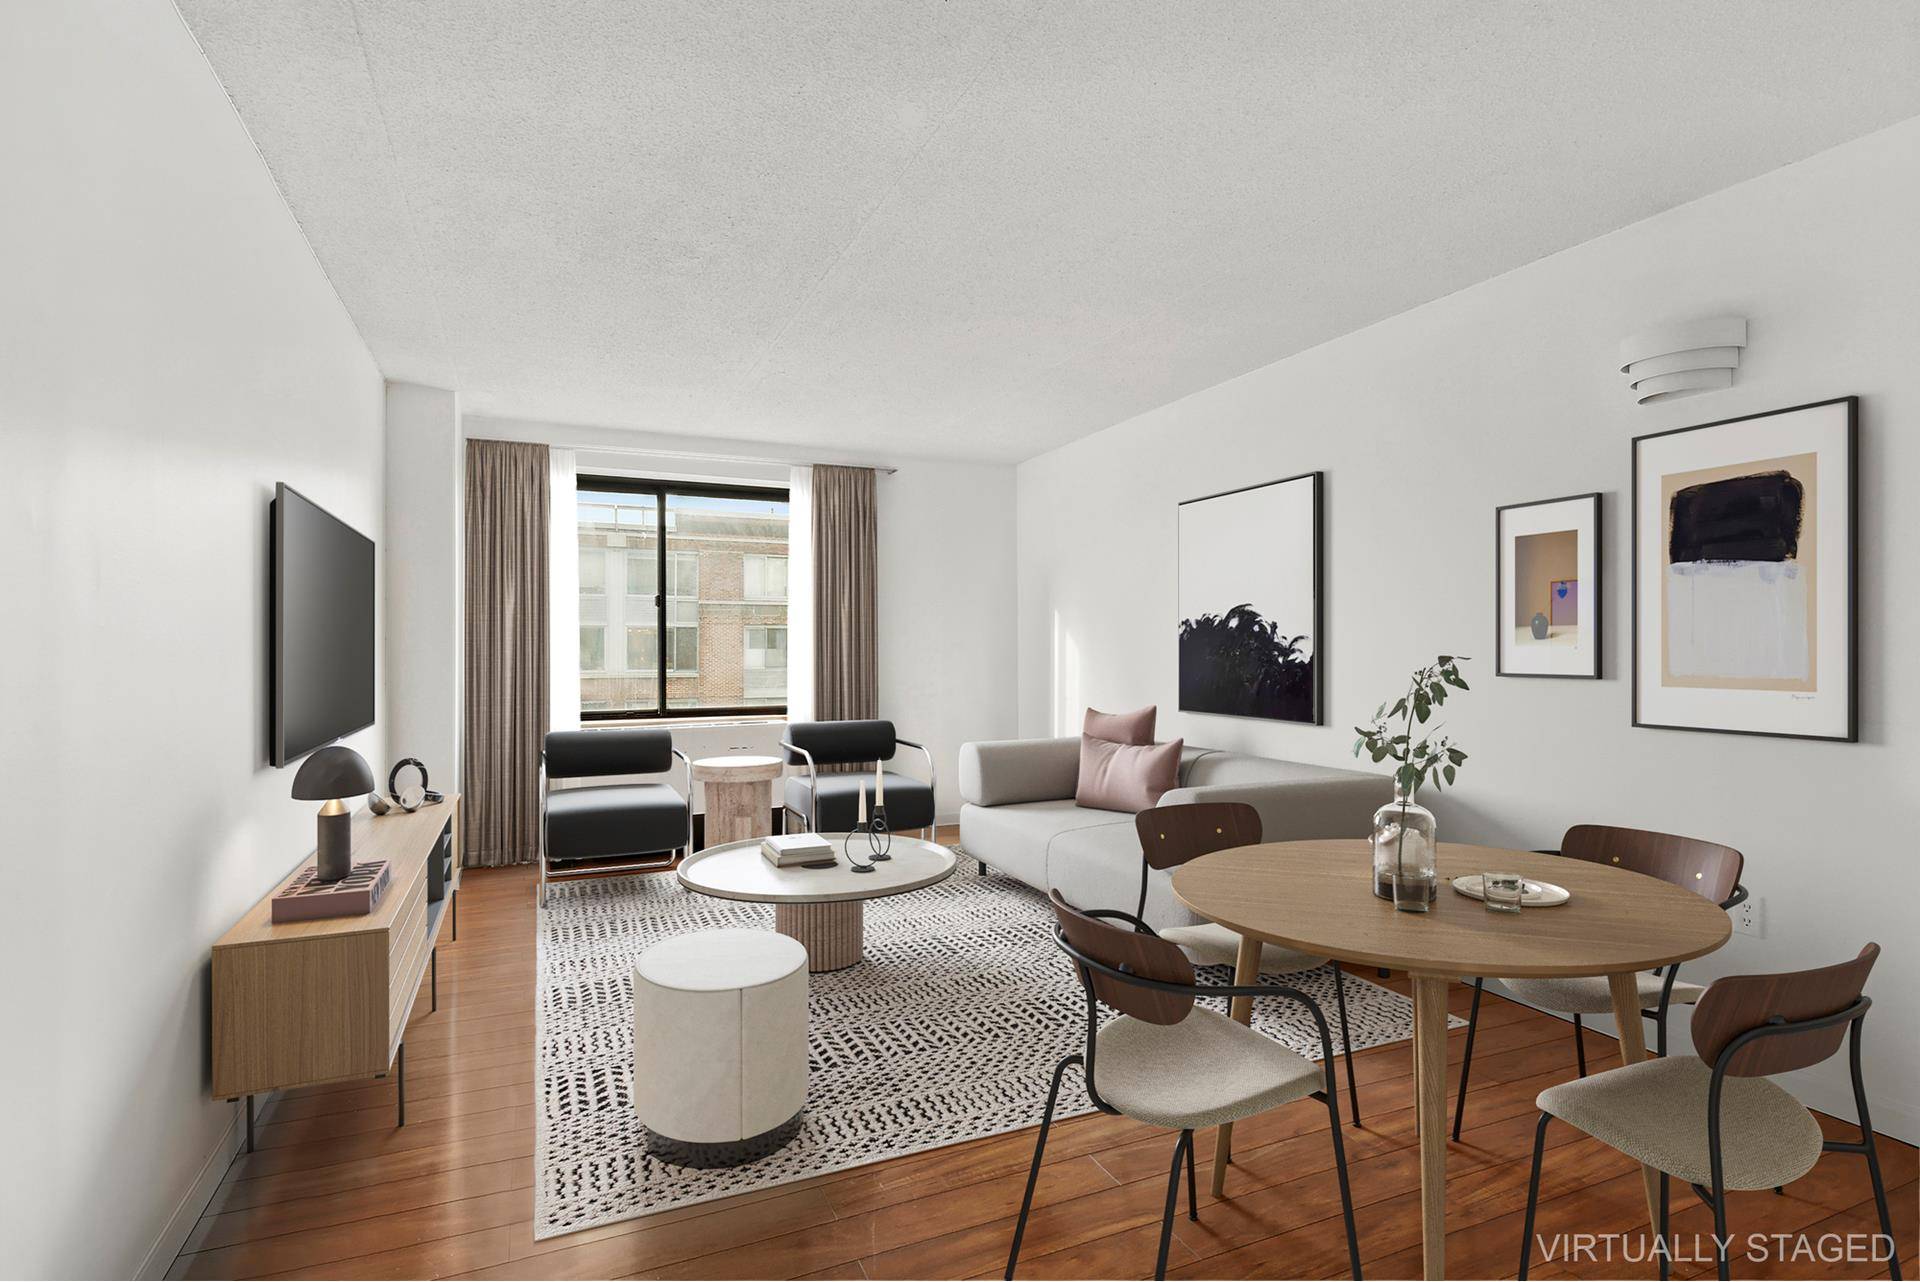 Discover the hidden gem of Manhattan living in Battery Park City, a serene oasis with park views, refreshing breezes, and a spacious 1 bedroom, 1 bathroom residence boasting large living ...